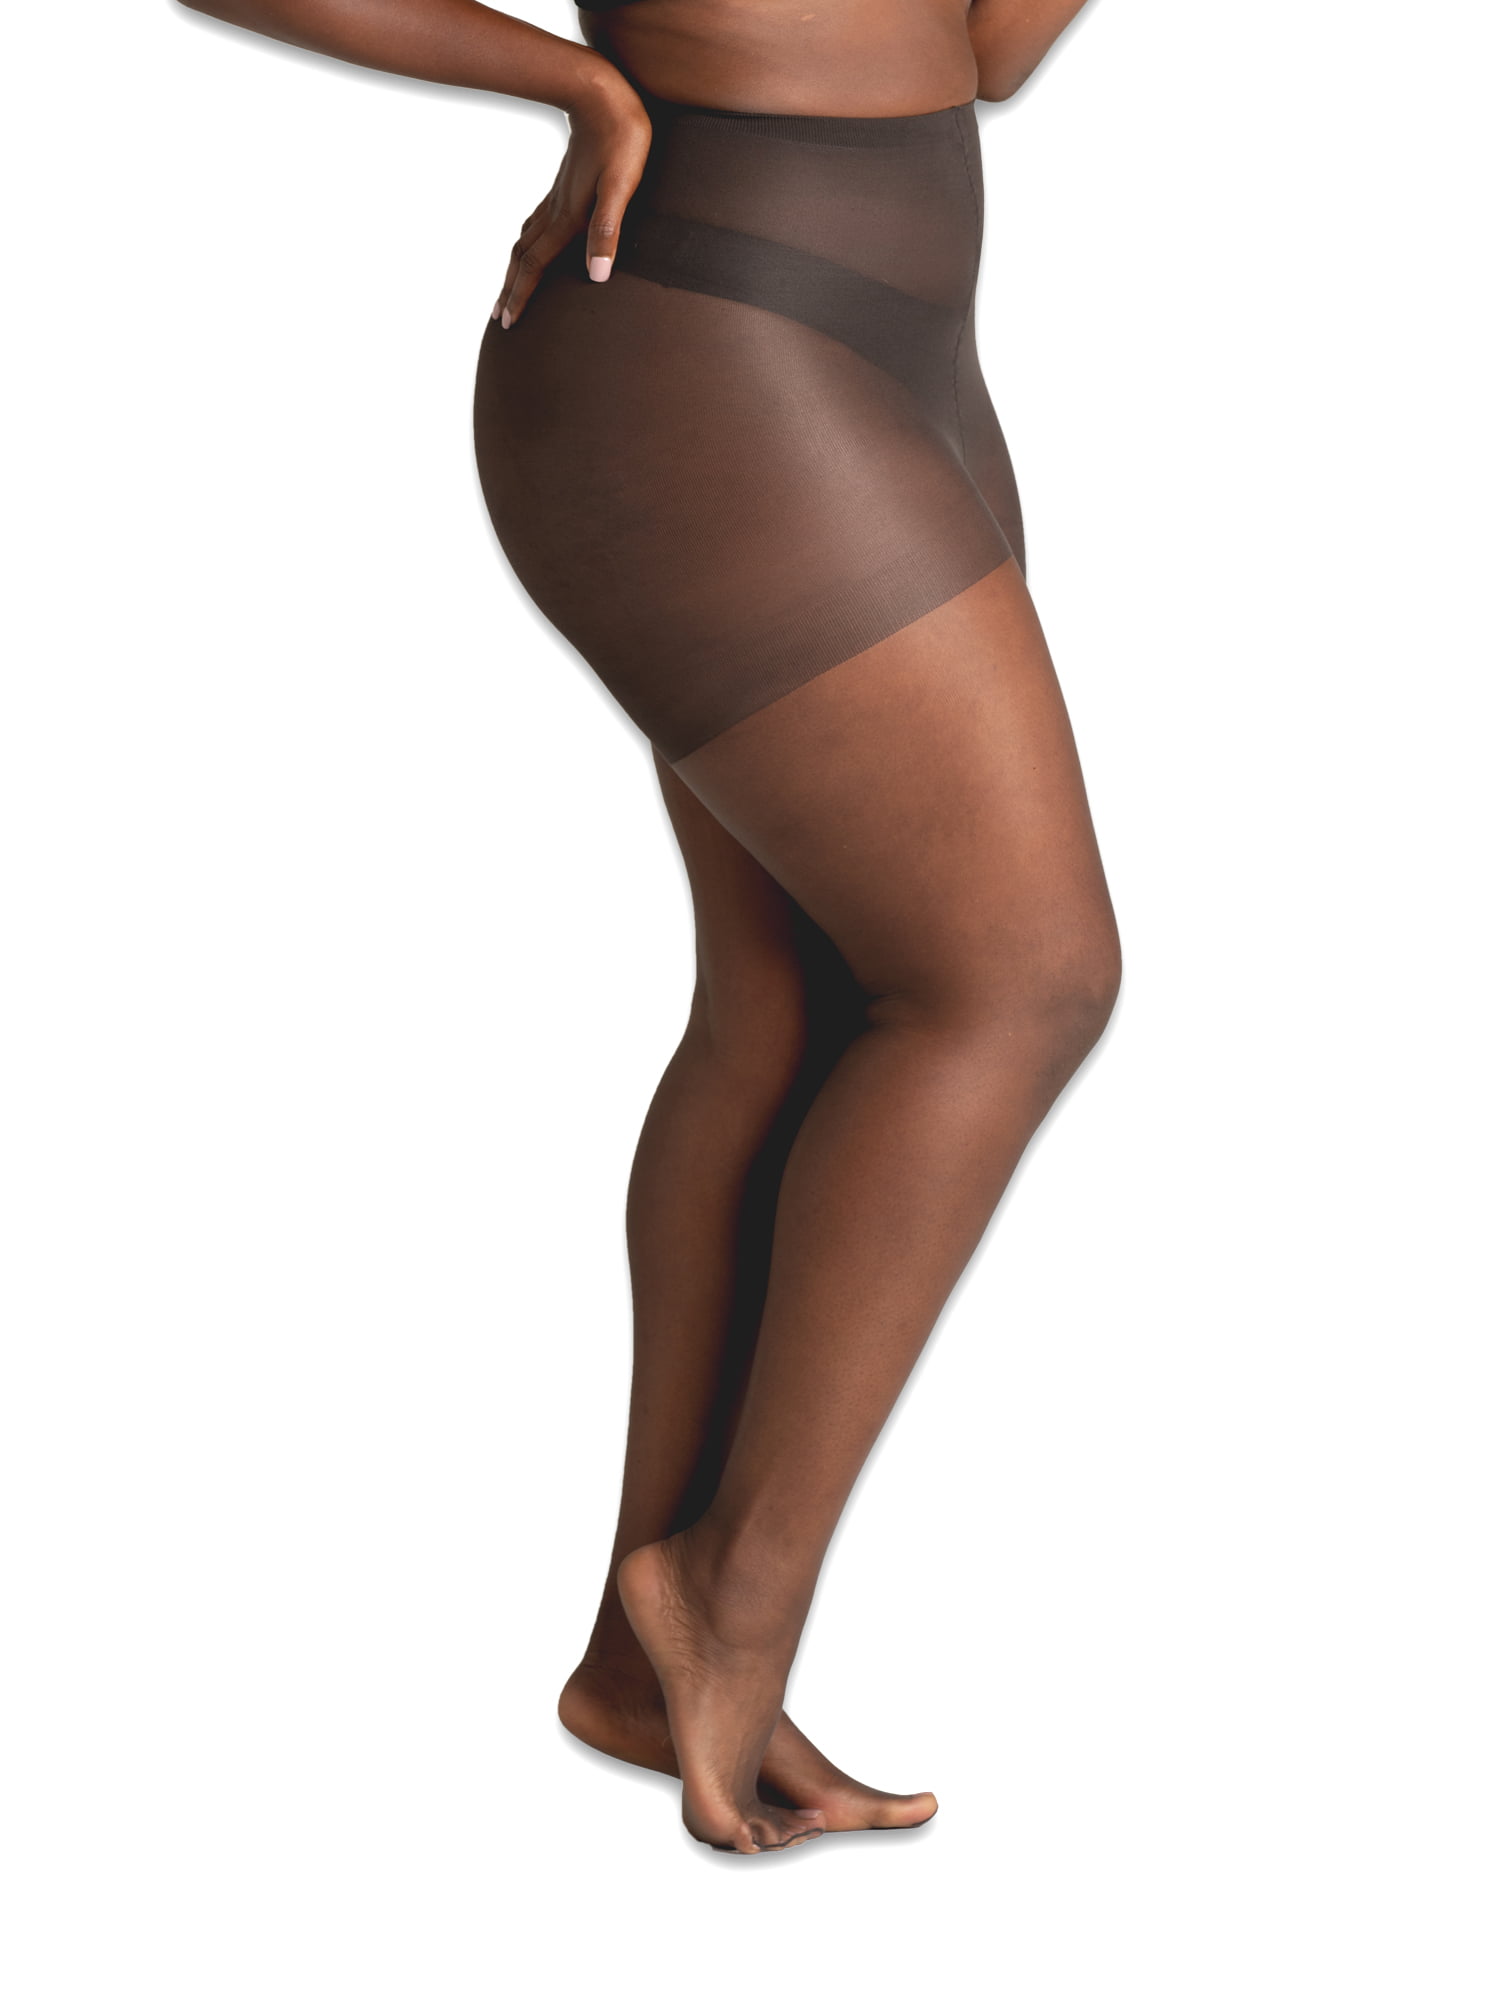 alma abraham recommends black women in pantyhose pic